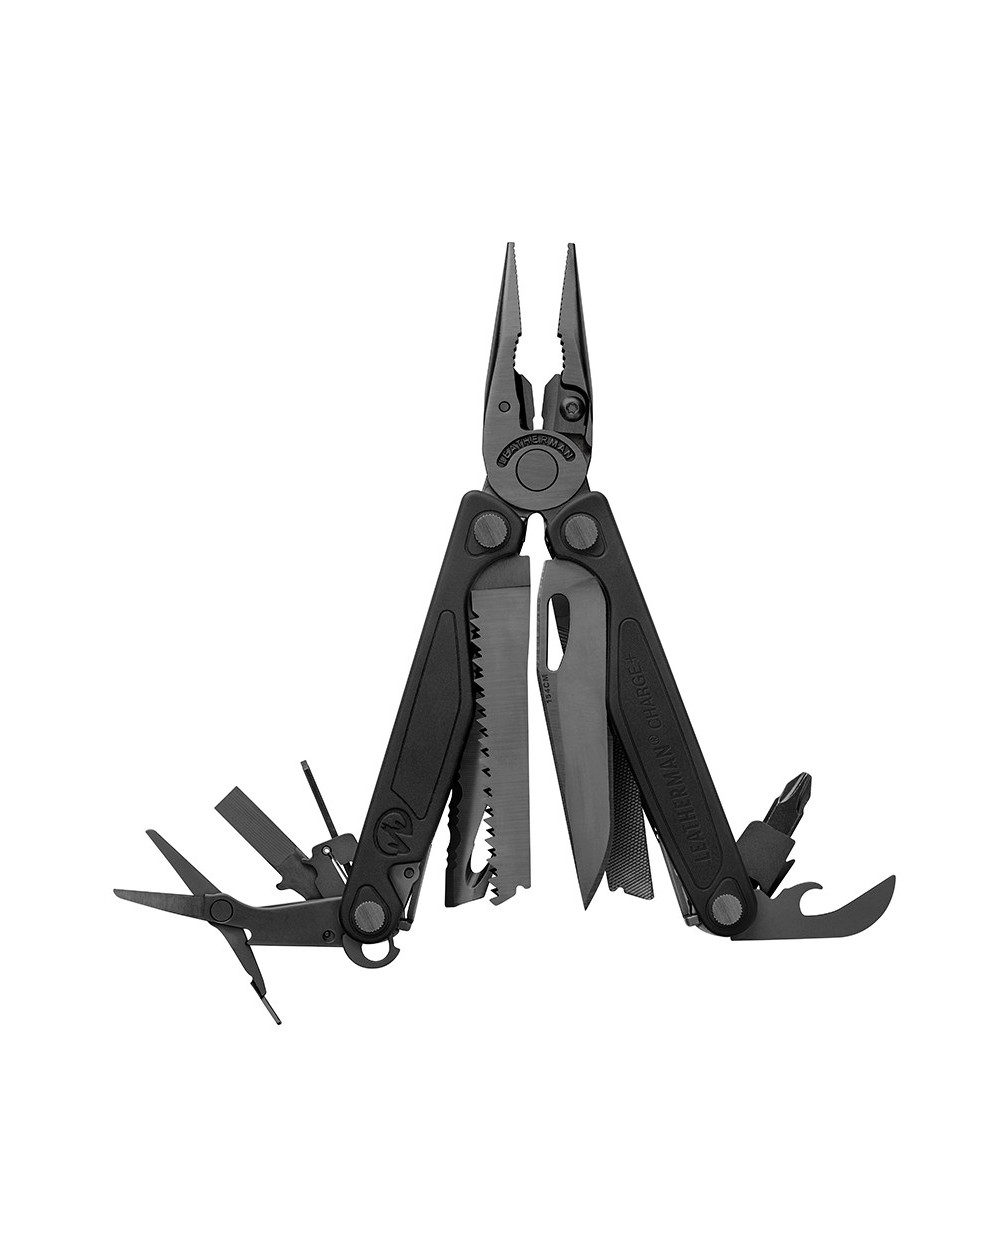 leatherman-pince-multifonctions-charge-plus-black-boite-832601-1